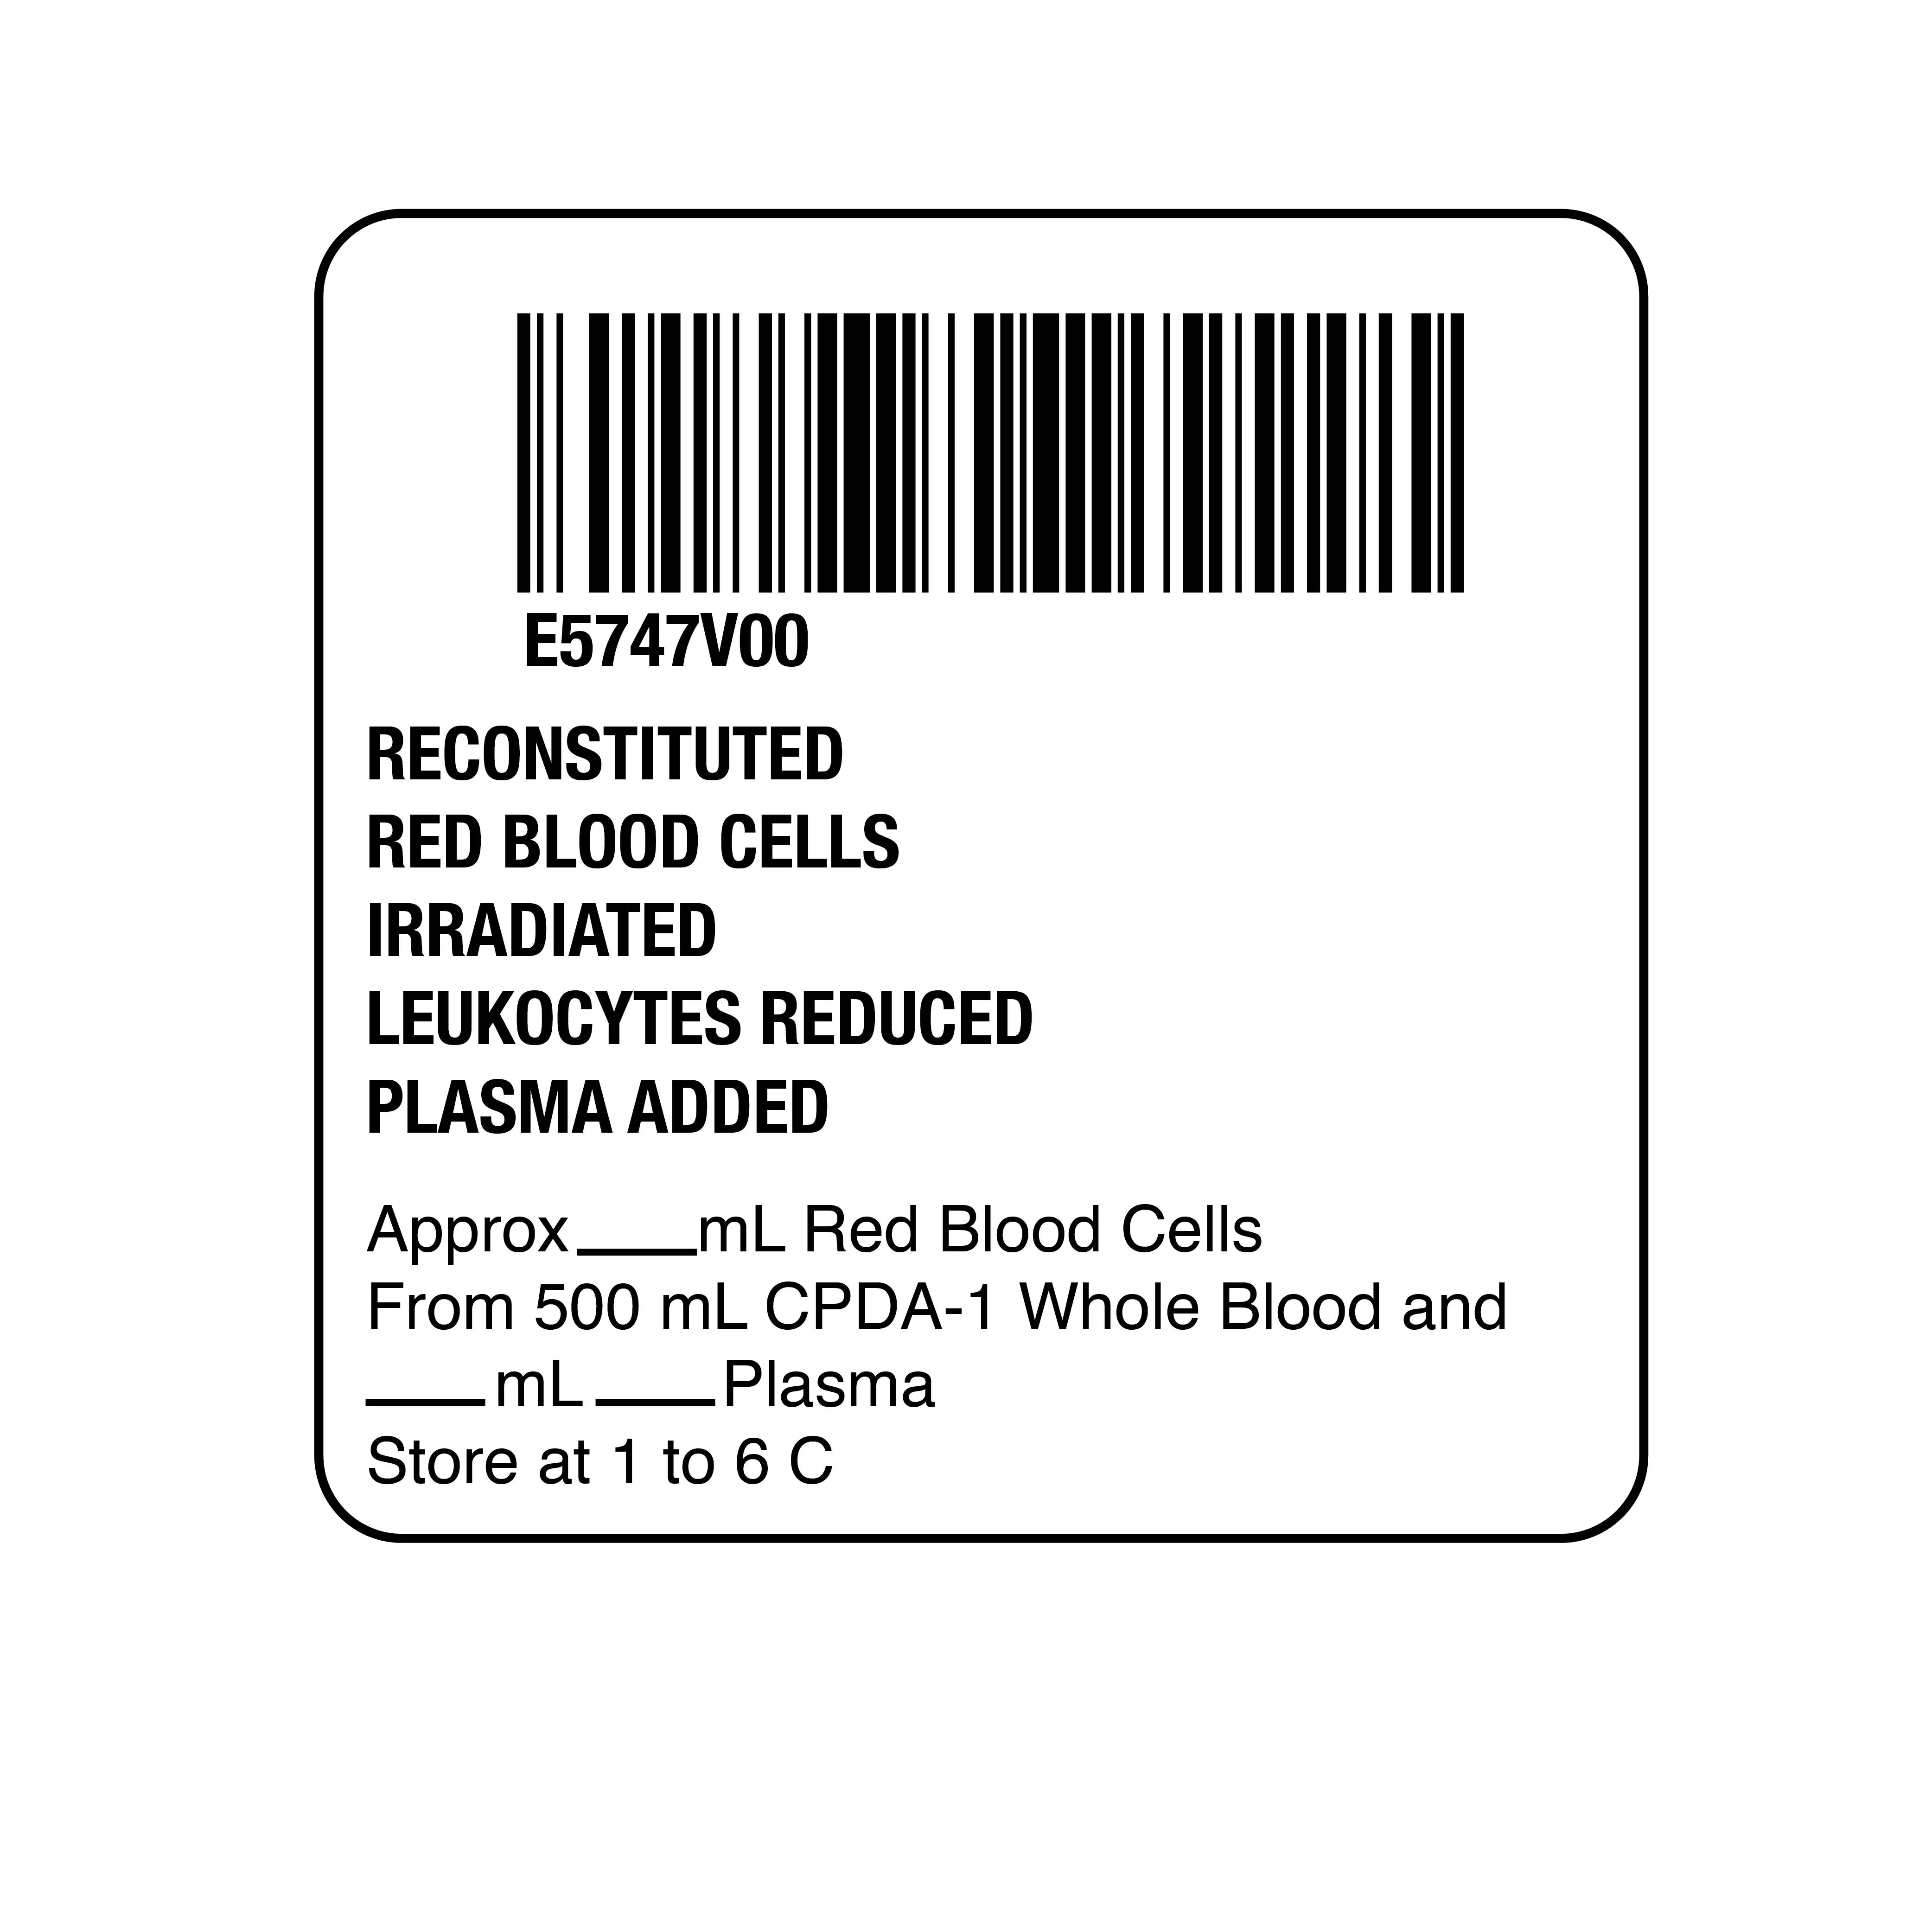 ISBT 128 Reconstituted Red Blood Cells Irradiated